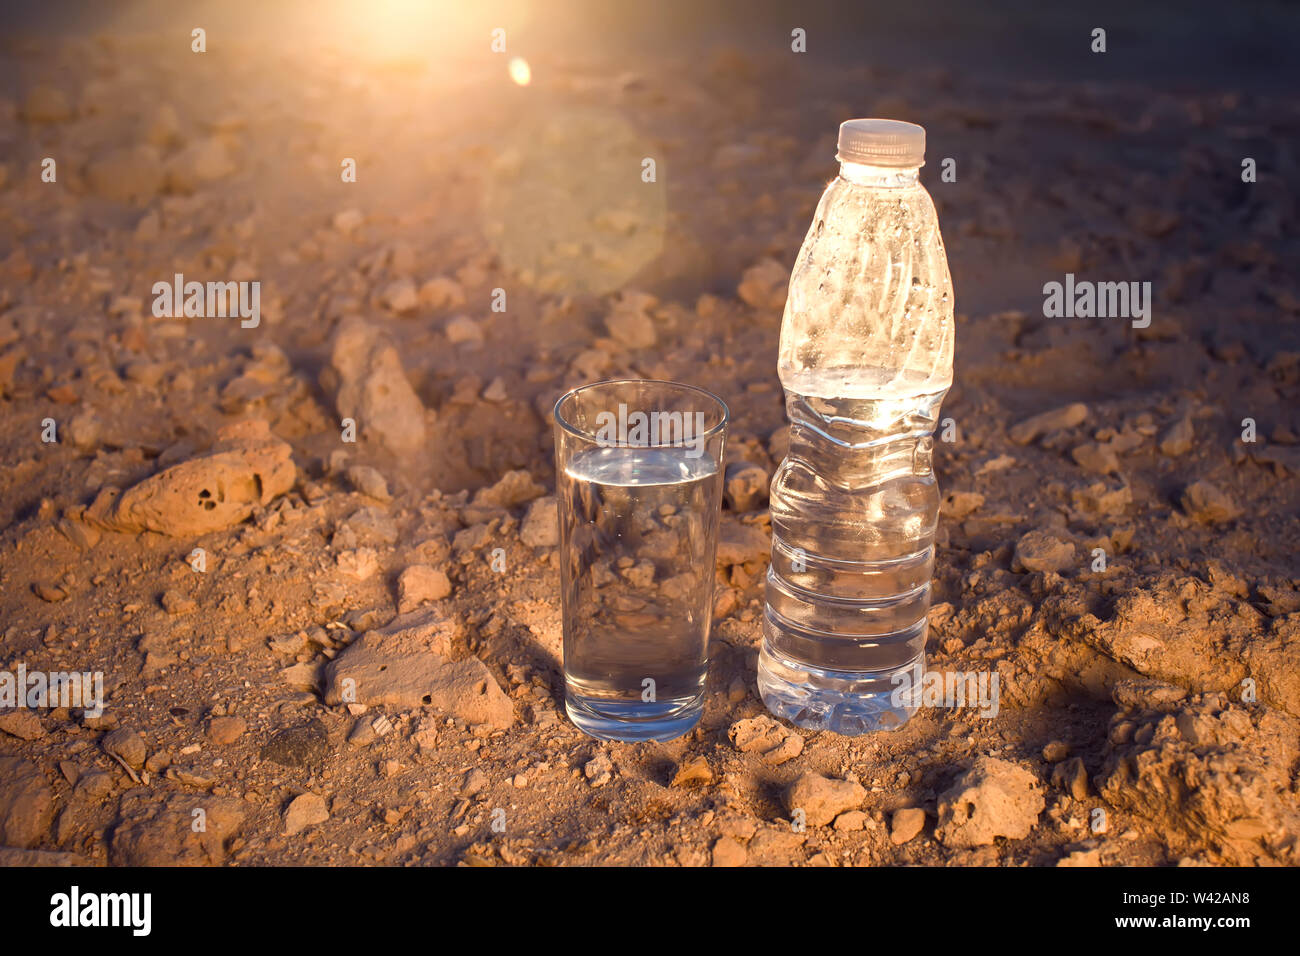 https://c8.alamy.com/comp/W42AN8/glass-and-bottle-of-water-on-sand-in-the-desert-thirsty-heat-and-drought-concept-W42AN8.jpg